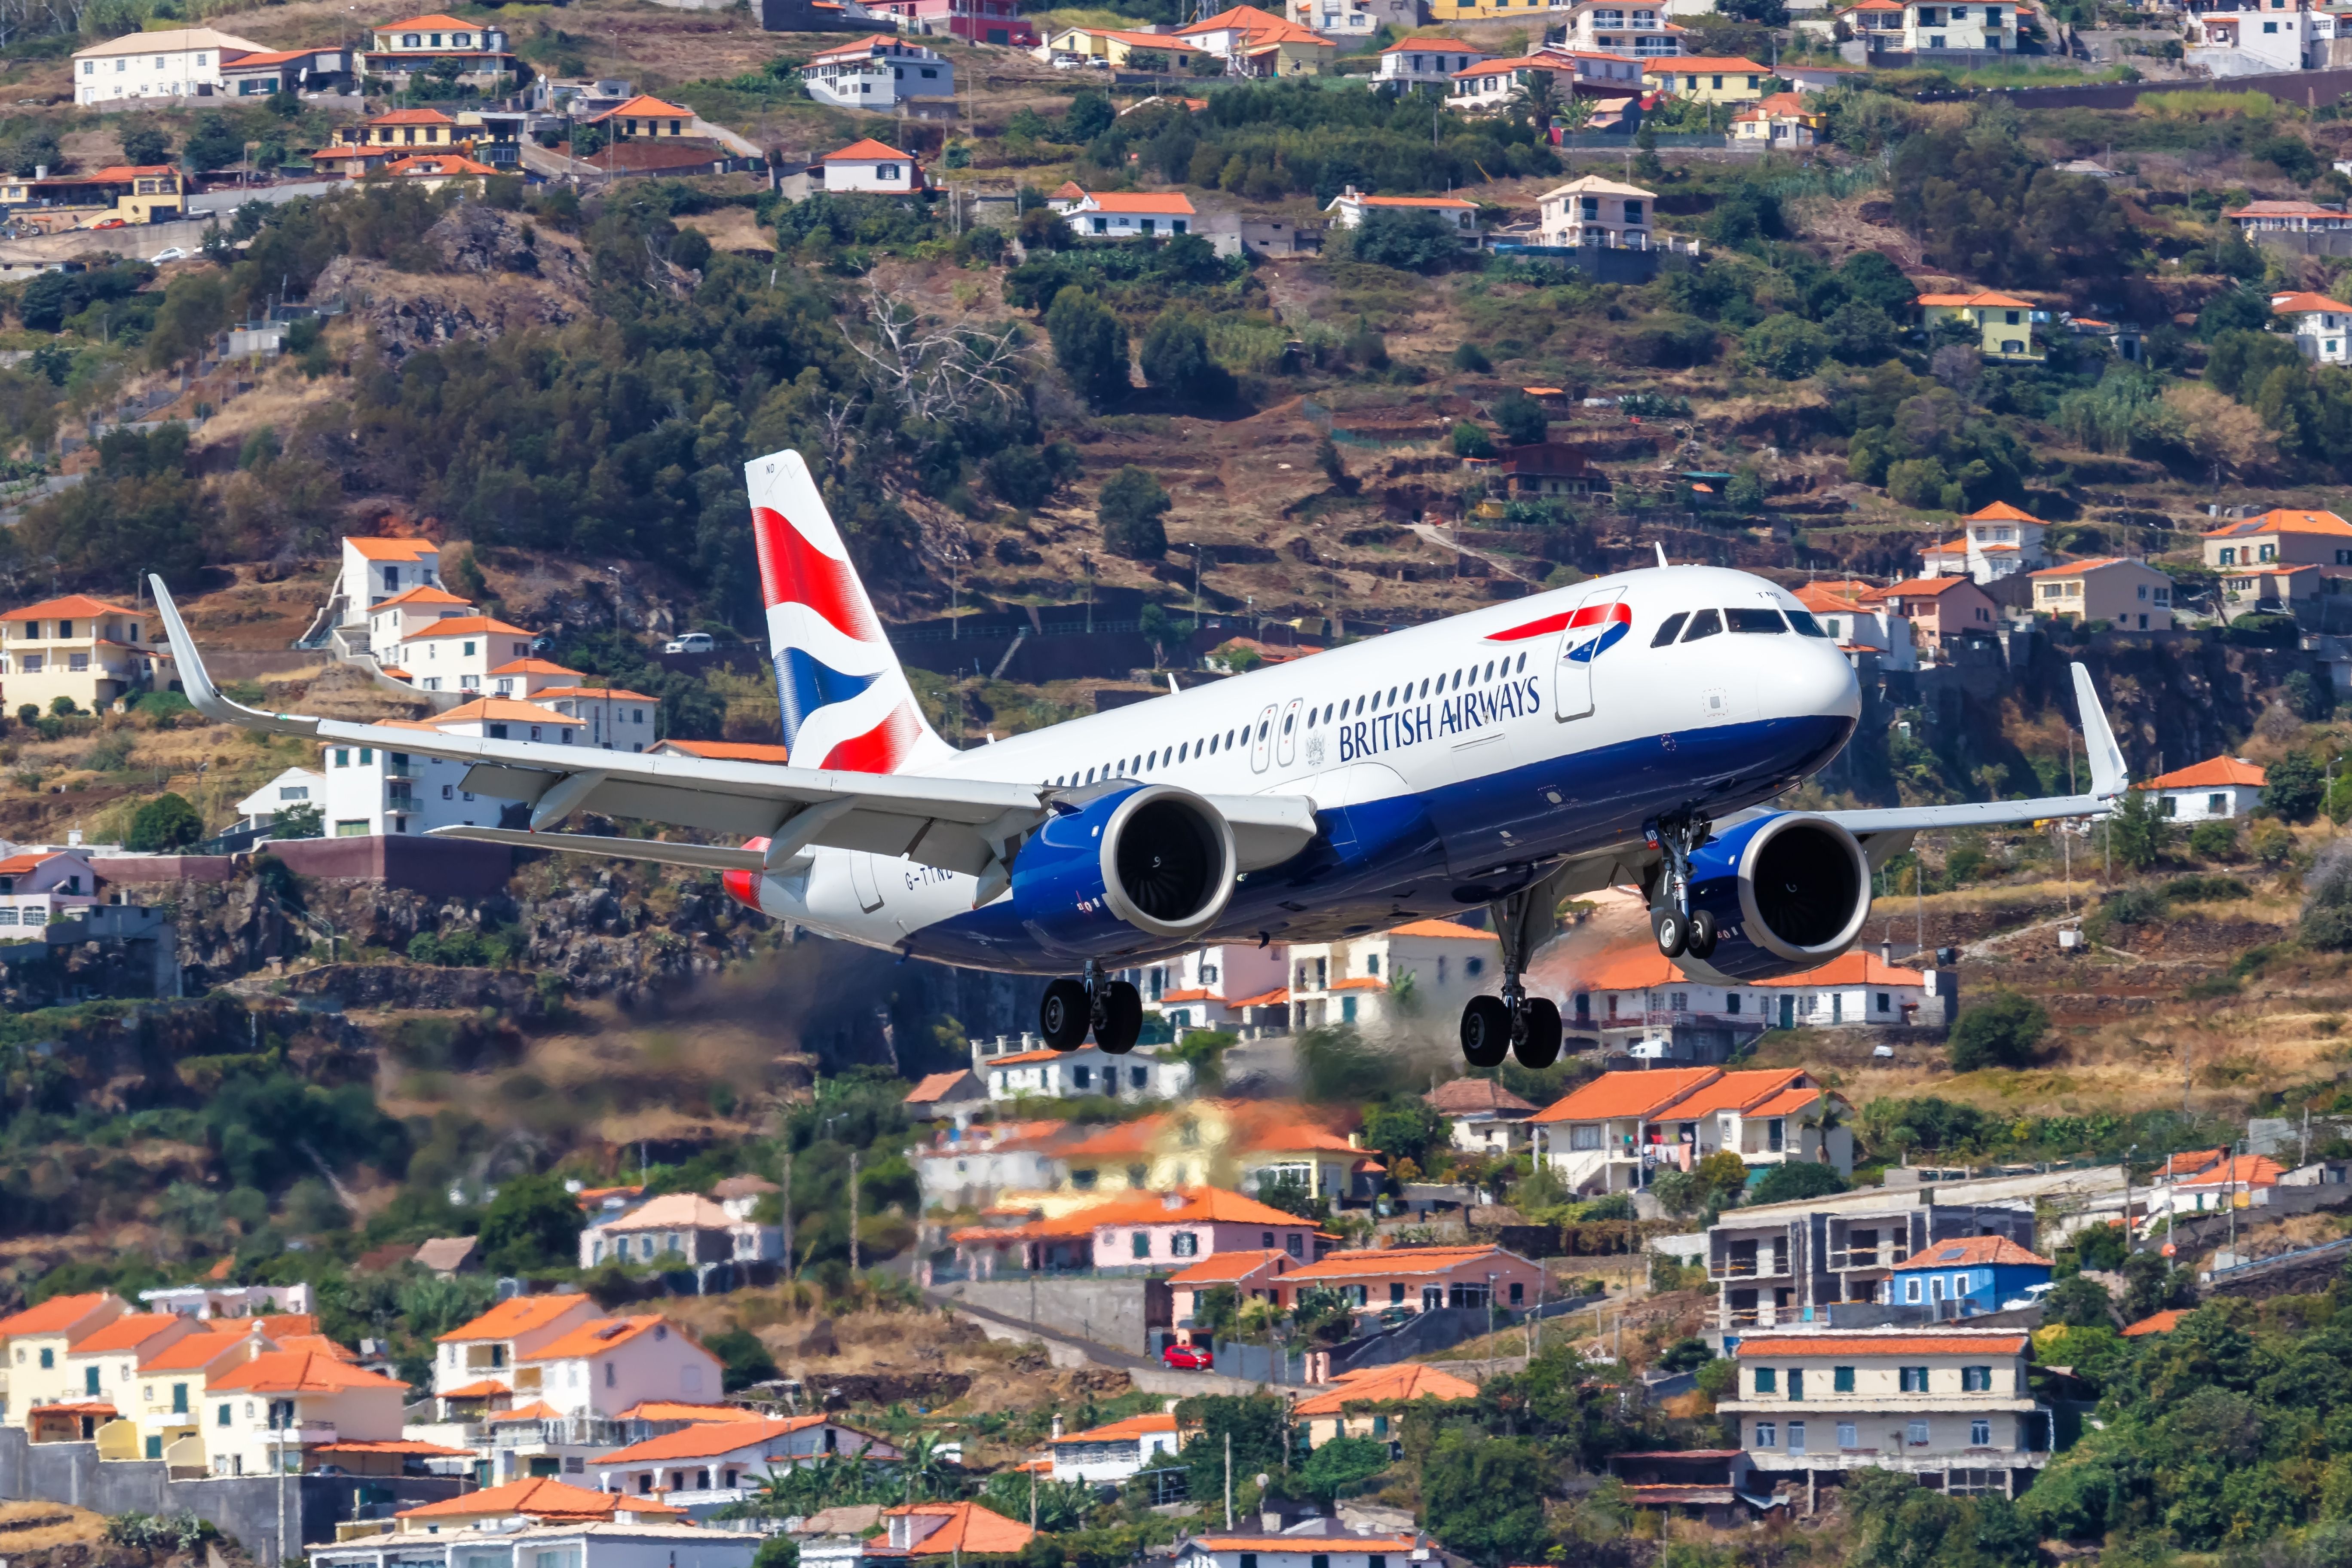 A British Airways Airbus A320neo landing in Funchal.